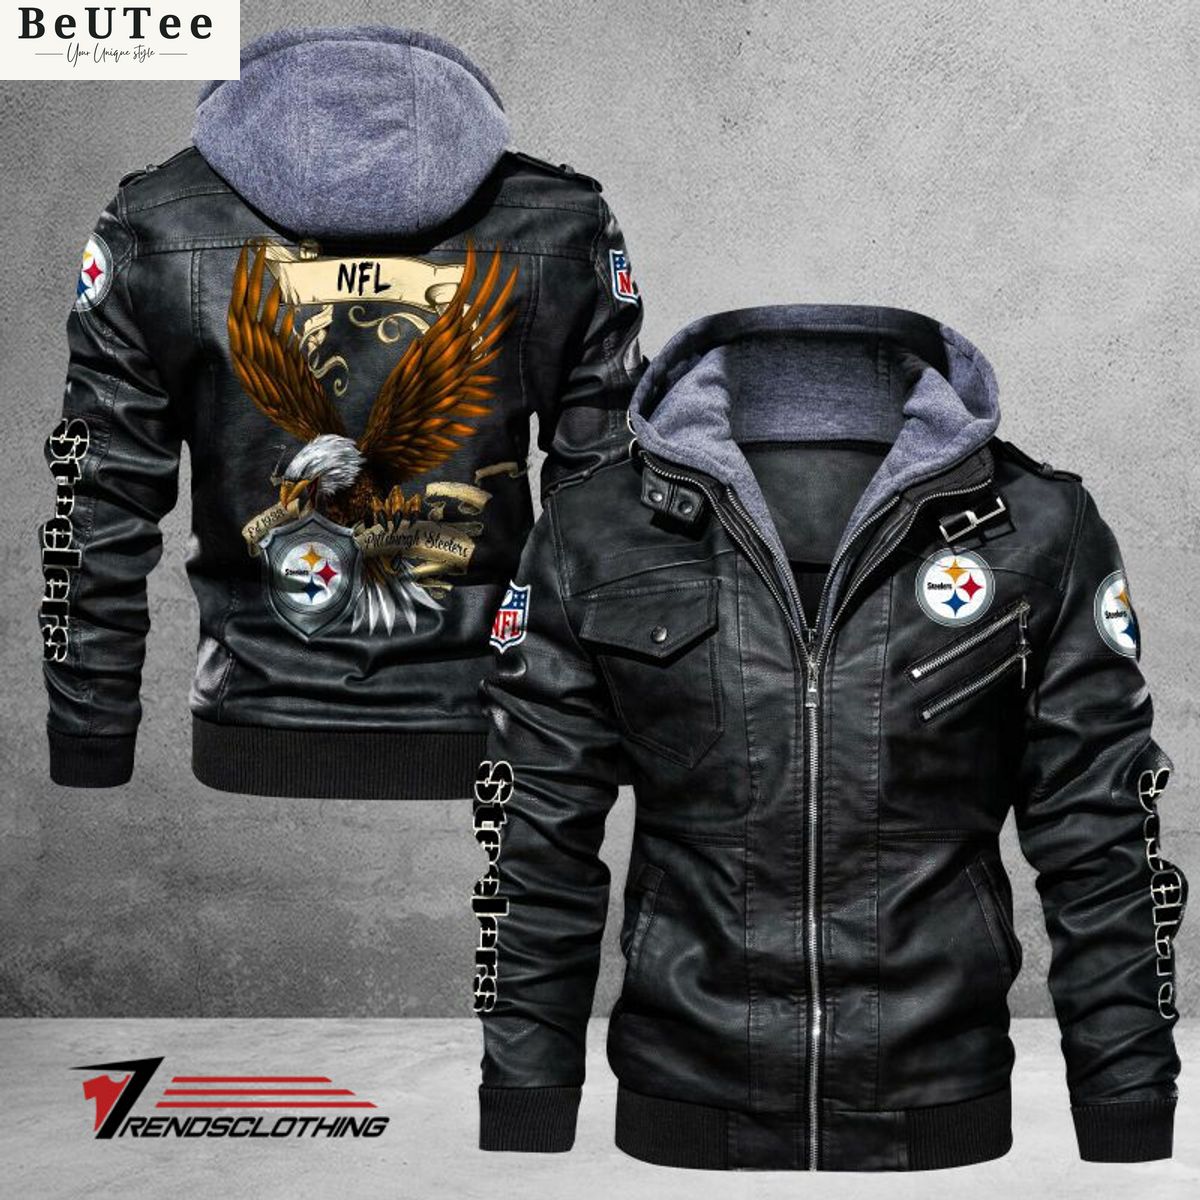 Pittsburgh Steelers Trending 2D Leather Jacket You look so healthy and fit